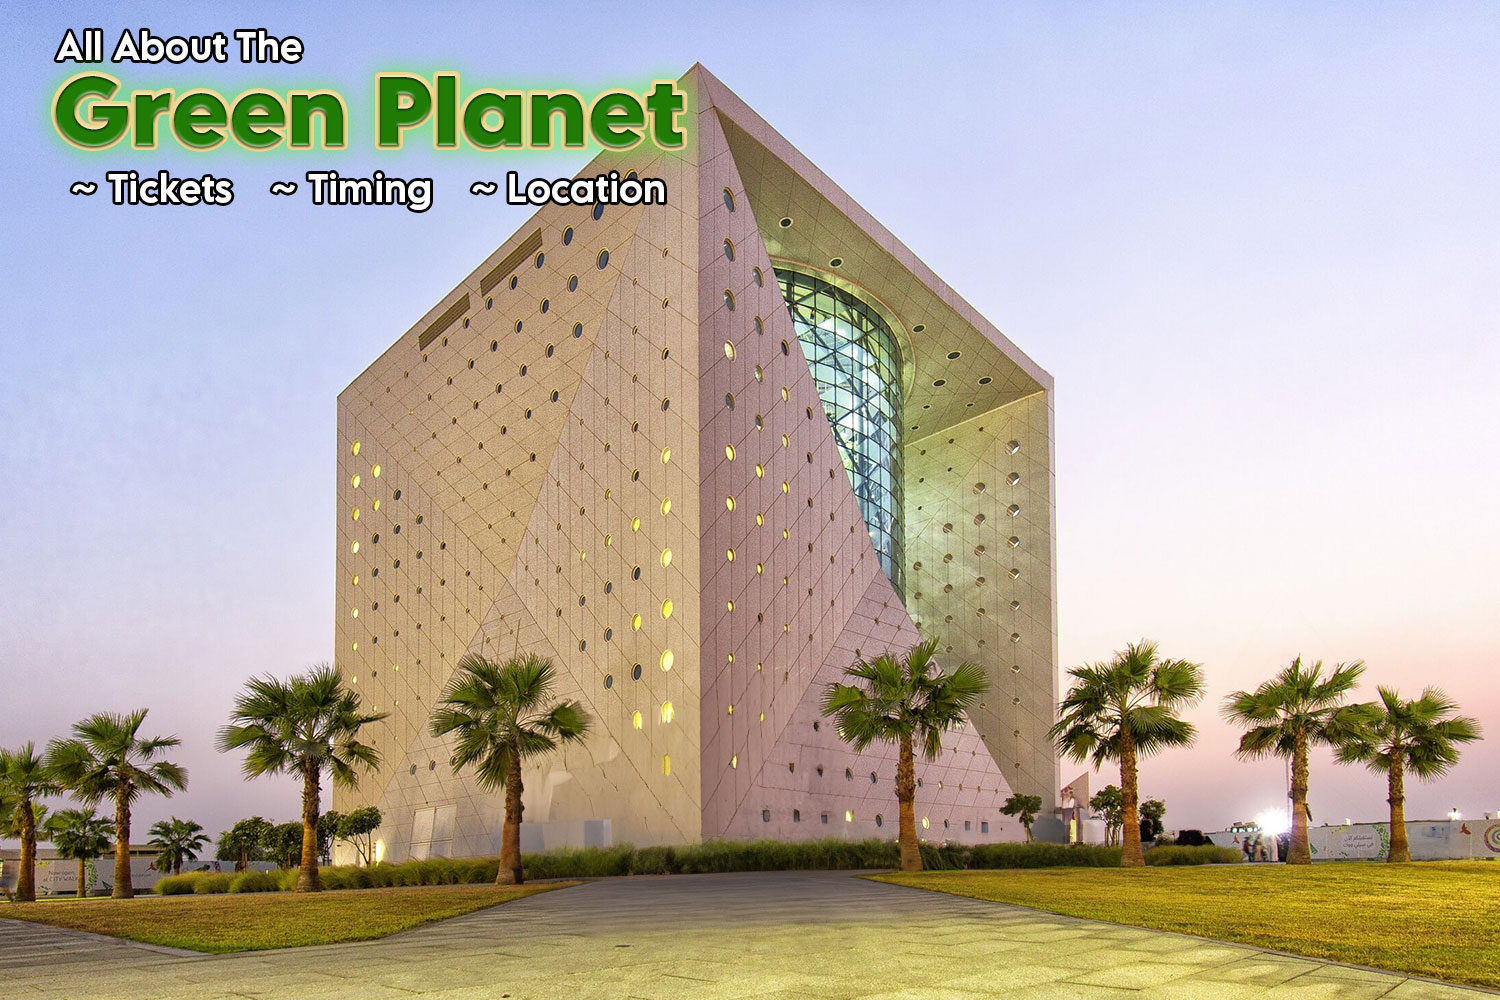 All About The Green Planet Dubai: Tickets, Timing & Location